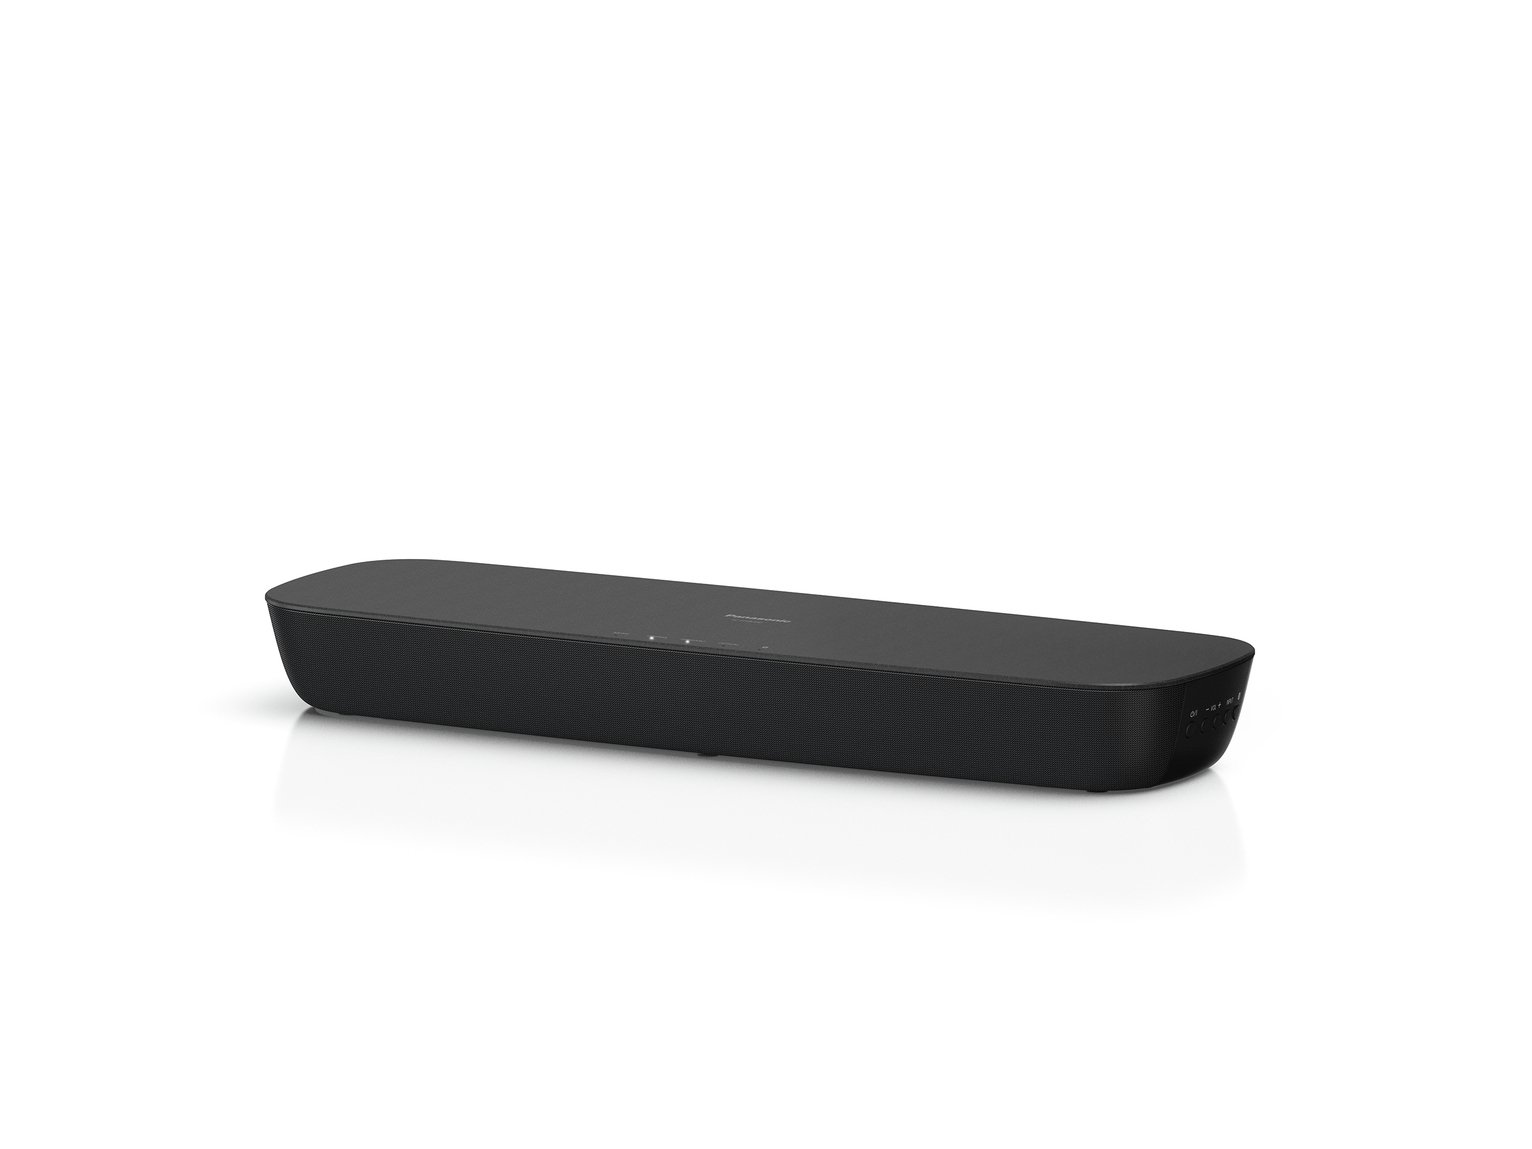 Panasonic SC-HTB200 80W RMS 2Ch All-In-One Sound Bar Review